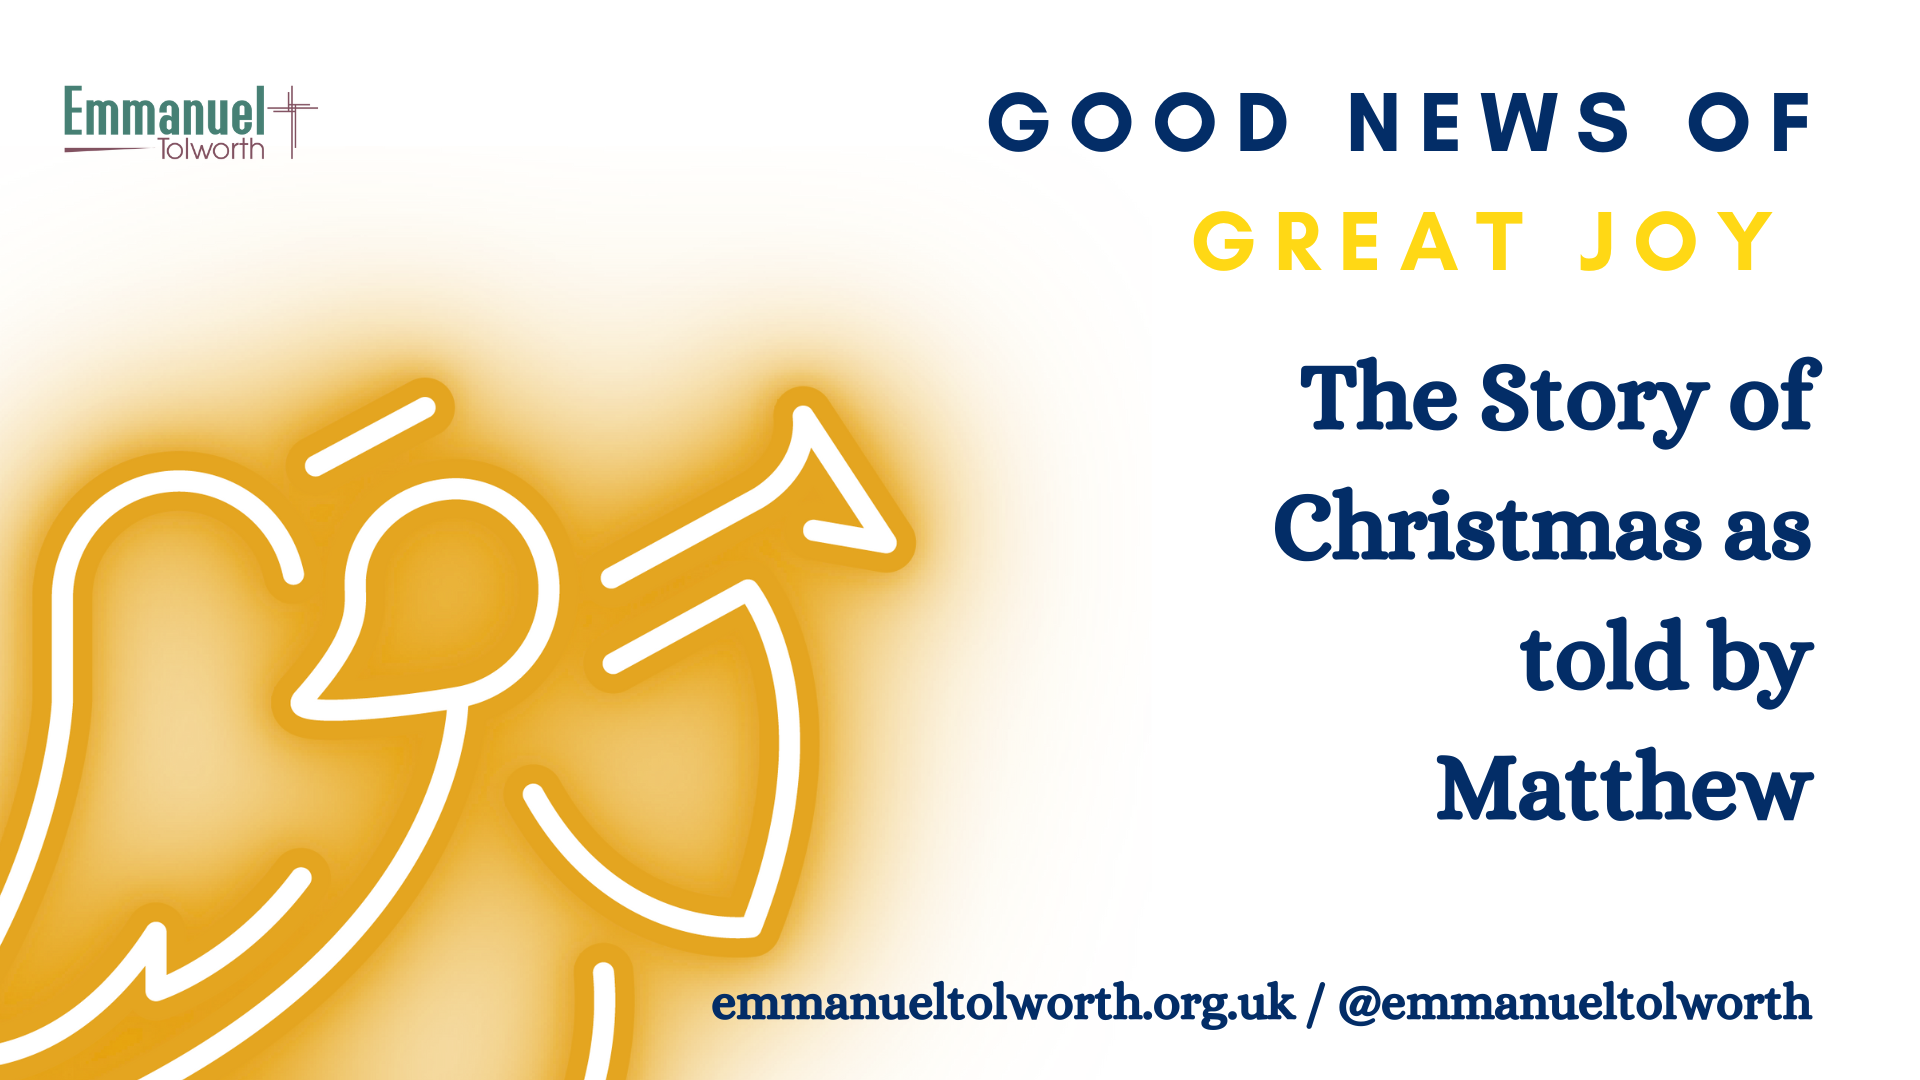 Christmas Day Service, Good News of Great Joy for All People – Matthew 1:18-25